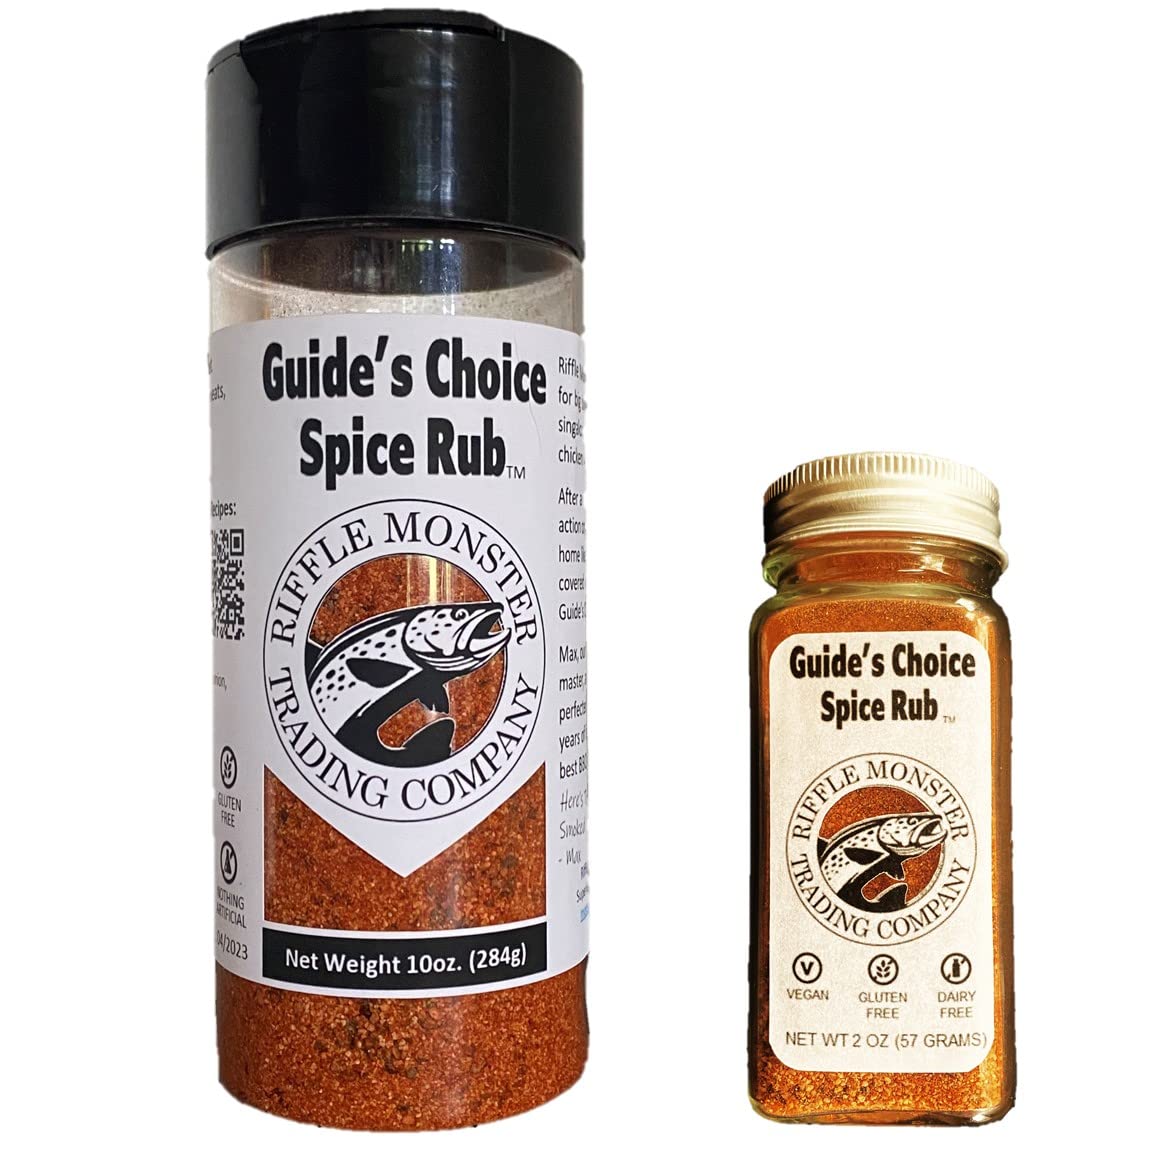 https://rifflemonster.com/wp-content/uploads/imported/Guides-Choice-Spice-Rub-All-Purpose-Seasoning-Blend-2oz-Spicy-Hot-Honey-Sweet-Low-Salt-For-Grilling-Smokin-B09XY2L867-4.jpg